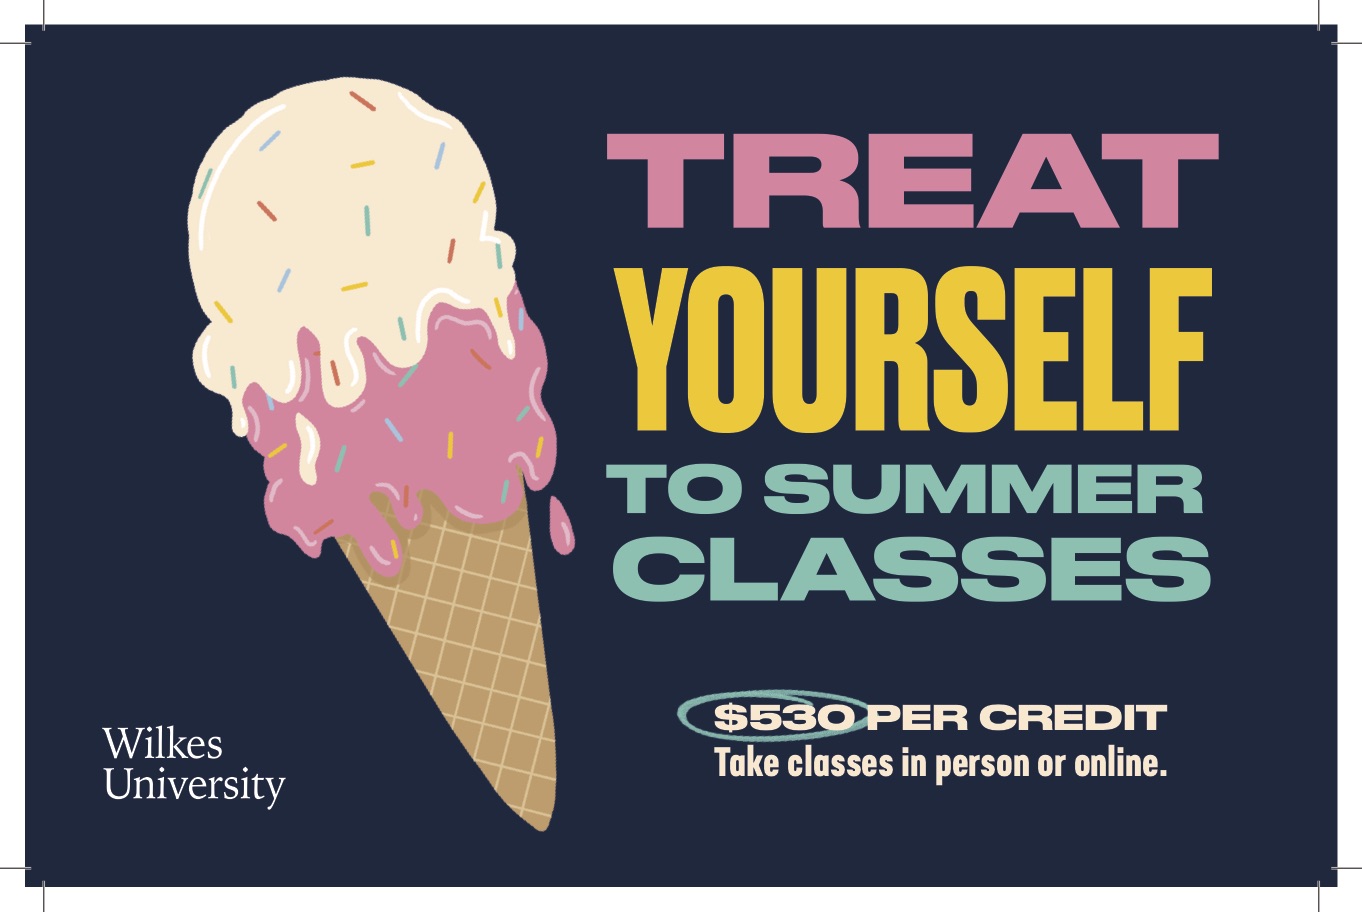 Summer graphic featuring an ice cream cone and the text "Treat Yourself to Summer Classes"